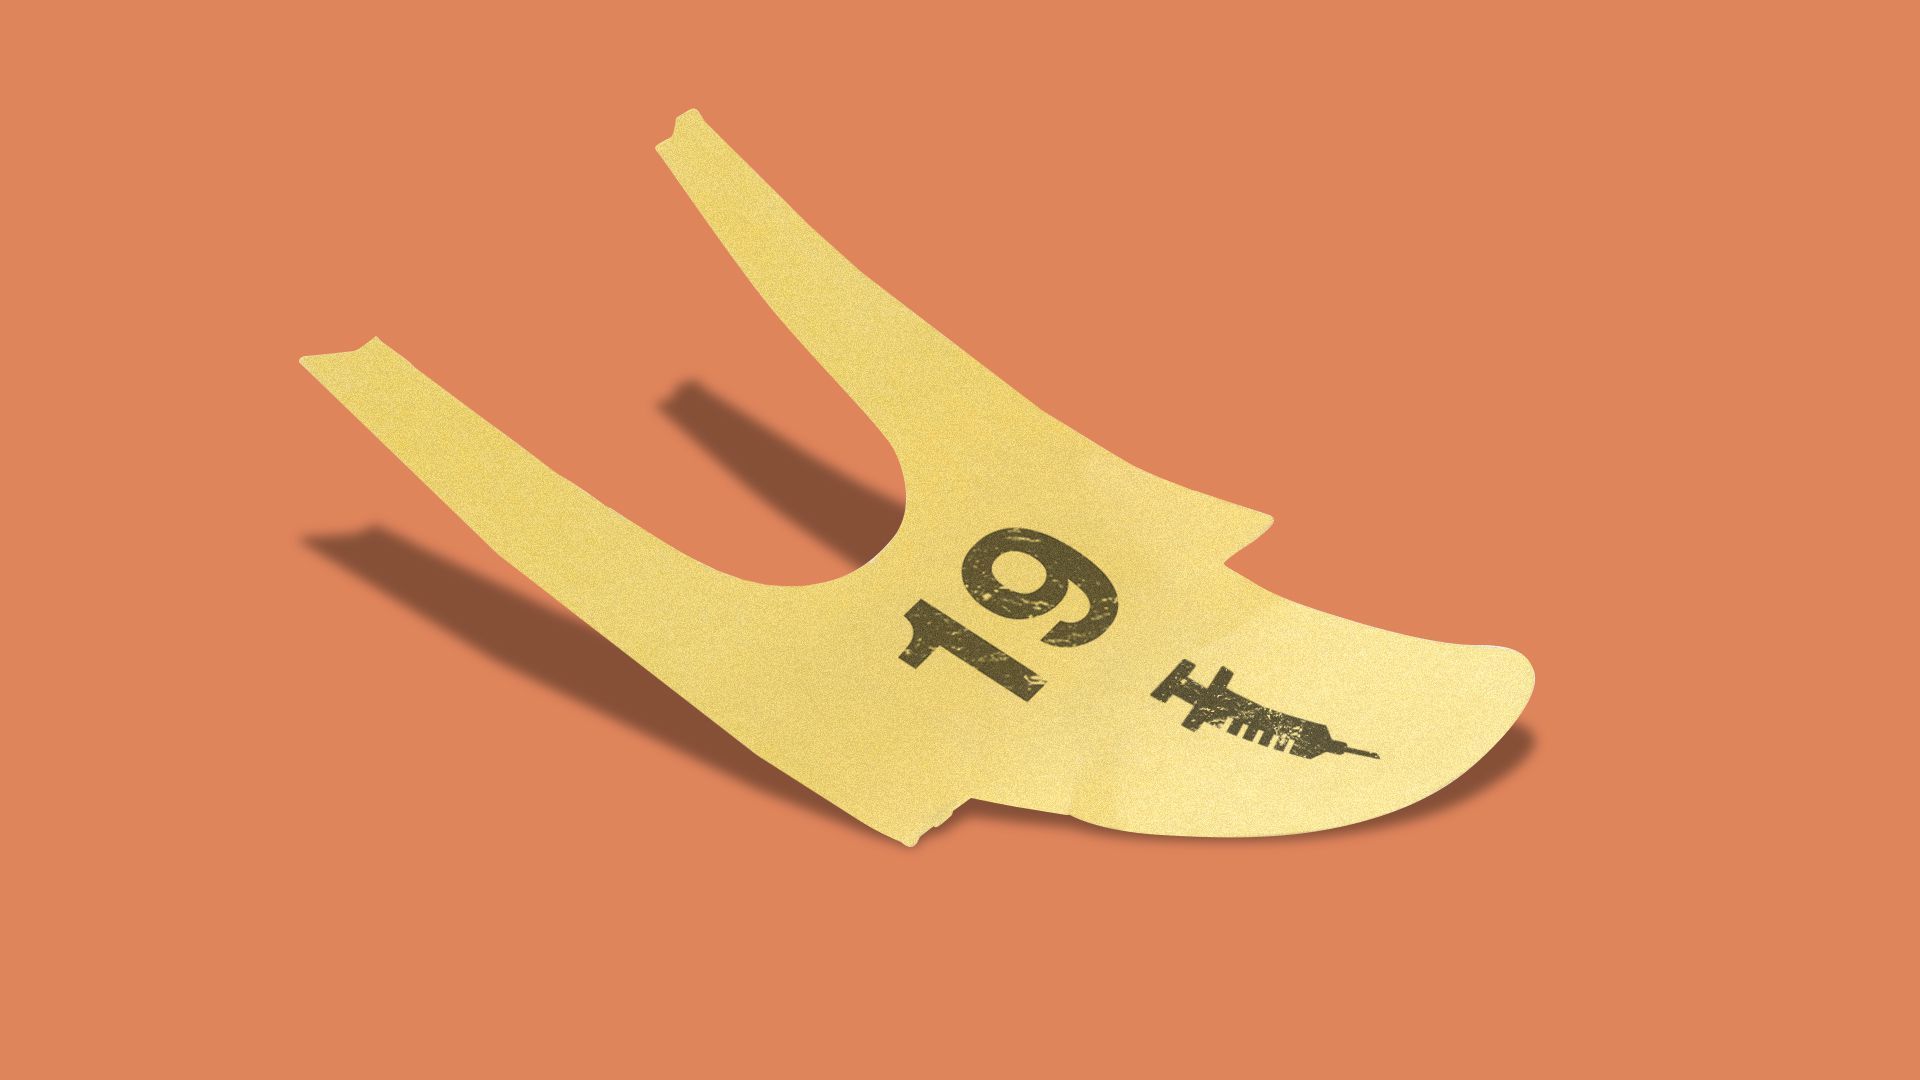 An illustration of a bakery-style queue tag with he number 19 and an icon for a syringe